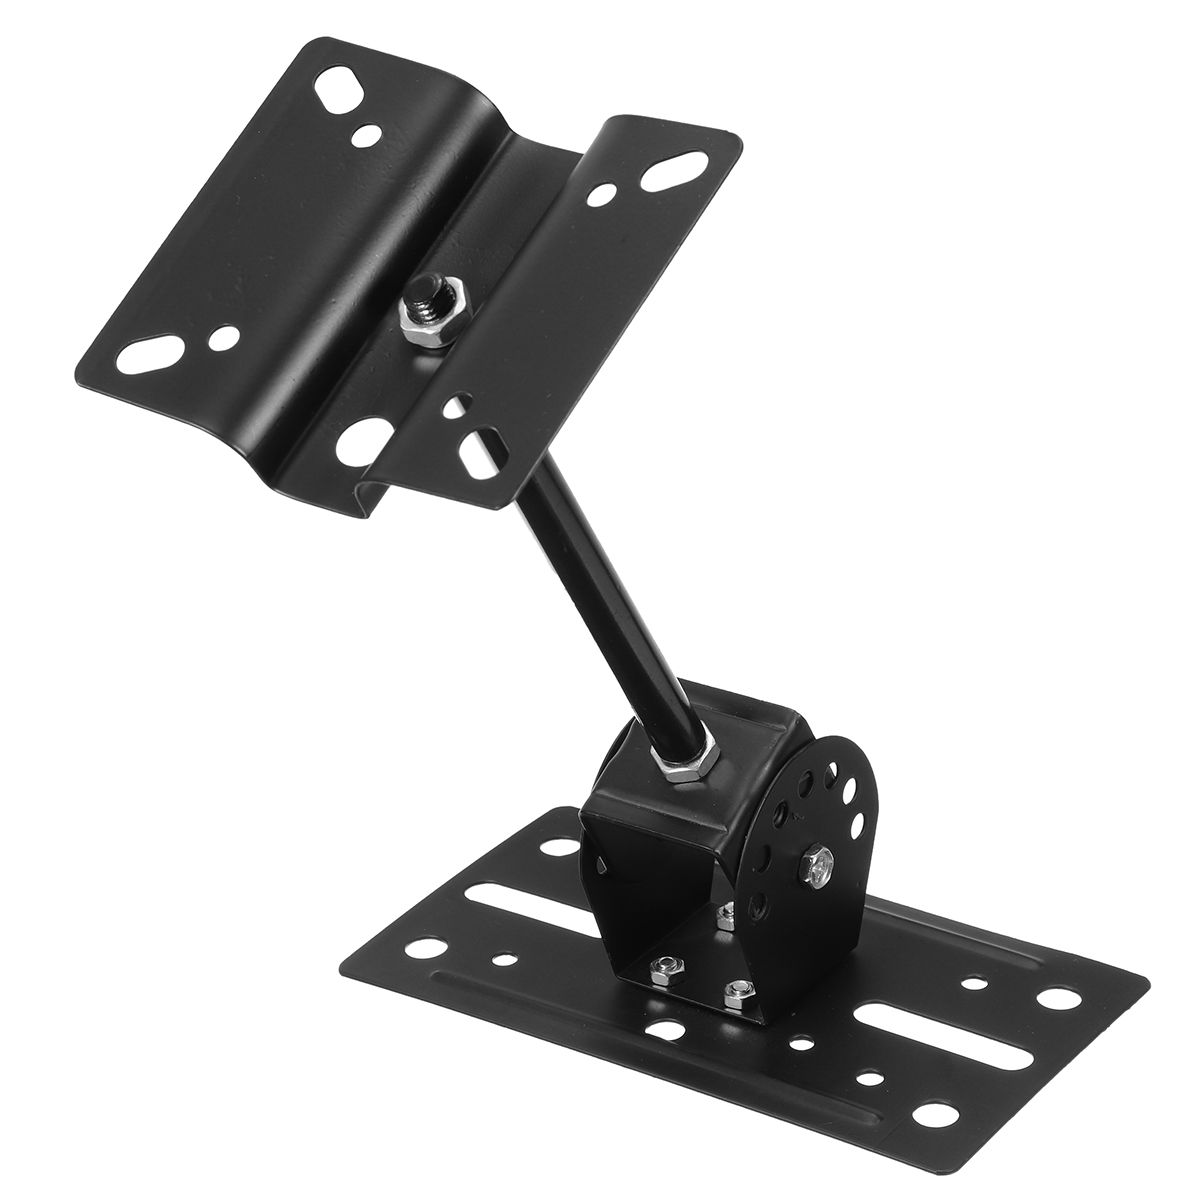 Universal-180-Degree-Rotation-Wall-Hanging-Bracket-Stand-Holder-Stabilizer-for-Speaker-Home-Theatre--1633796